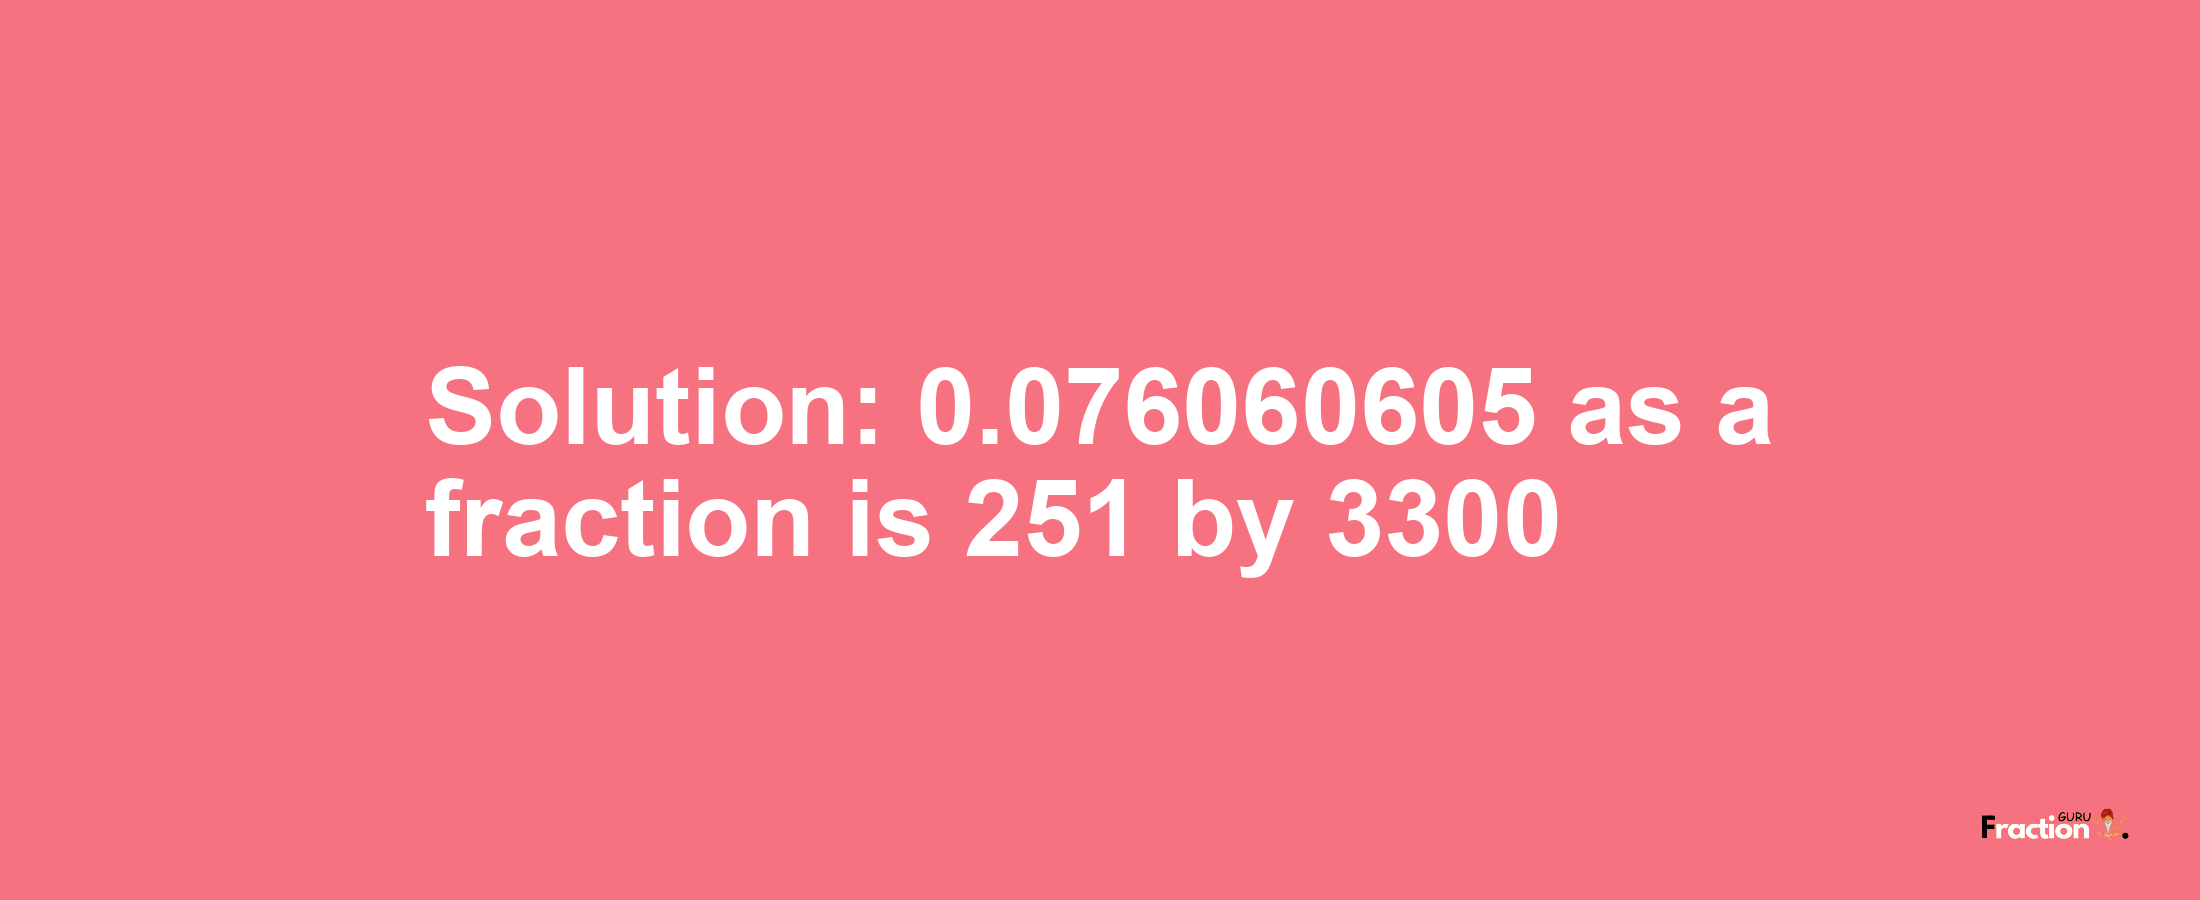 Solution:0.076060605 as a fraction is 251/3300